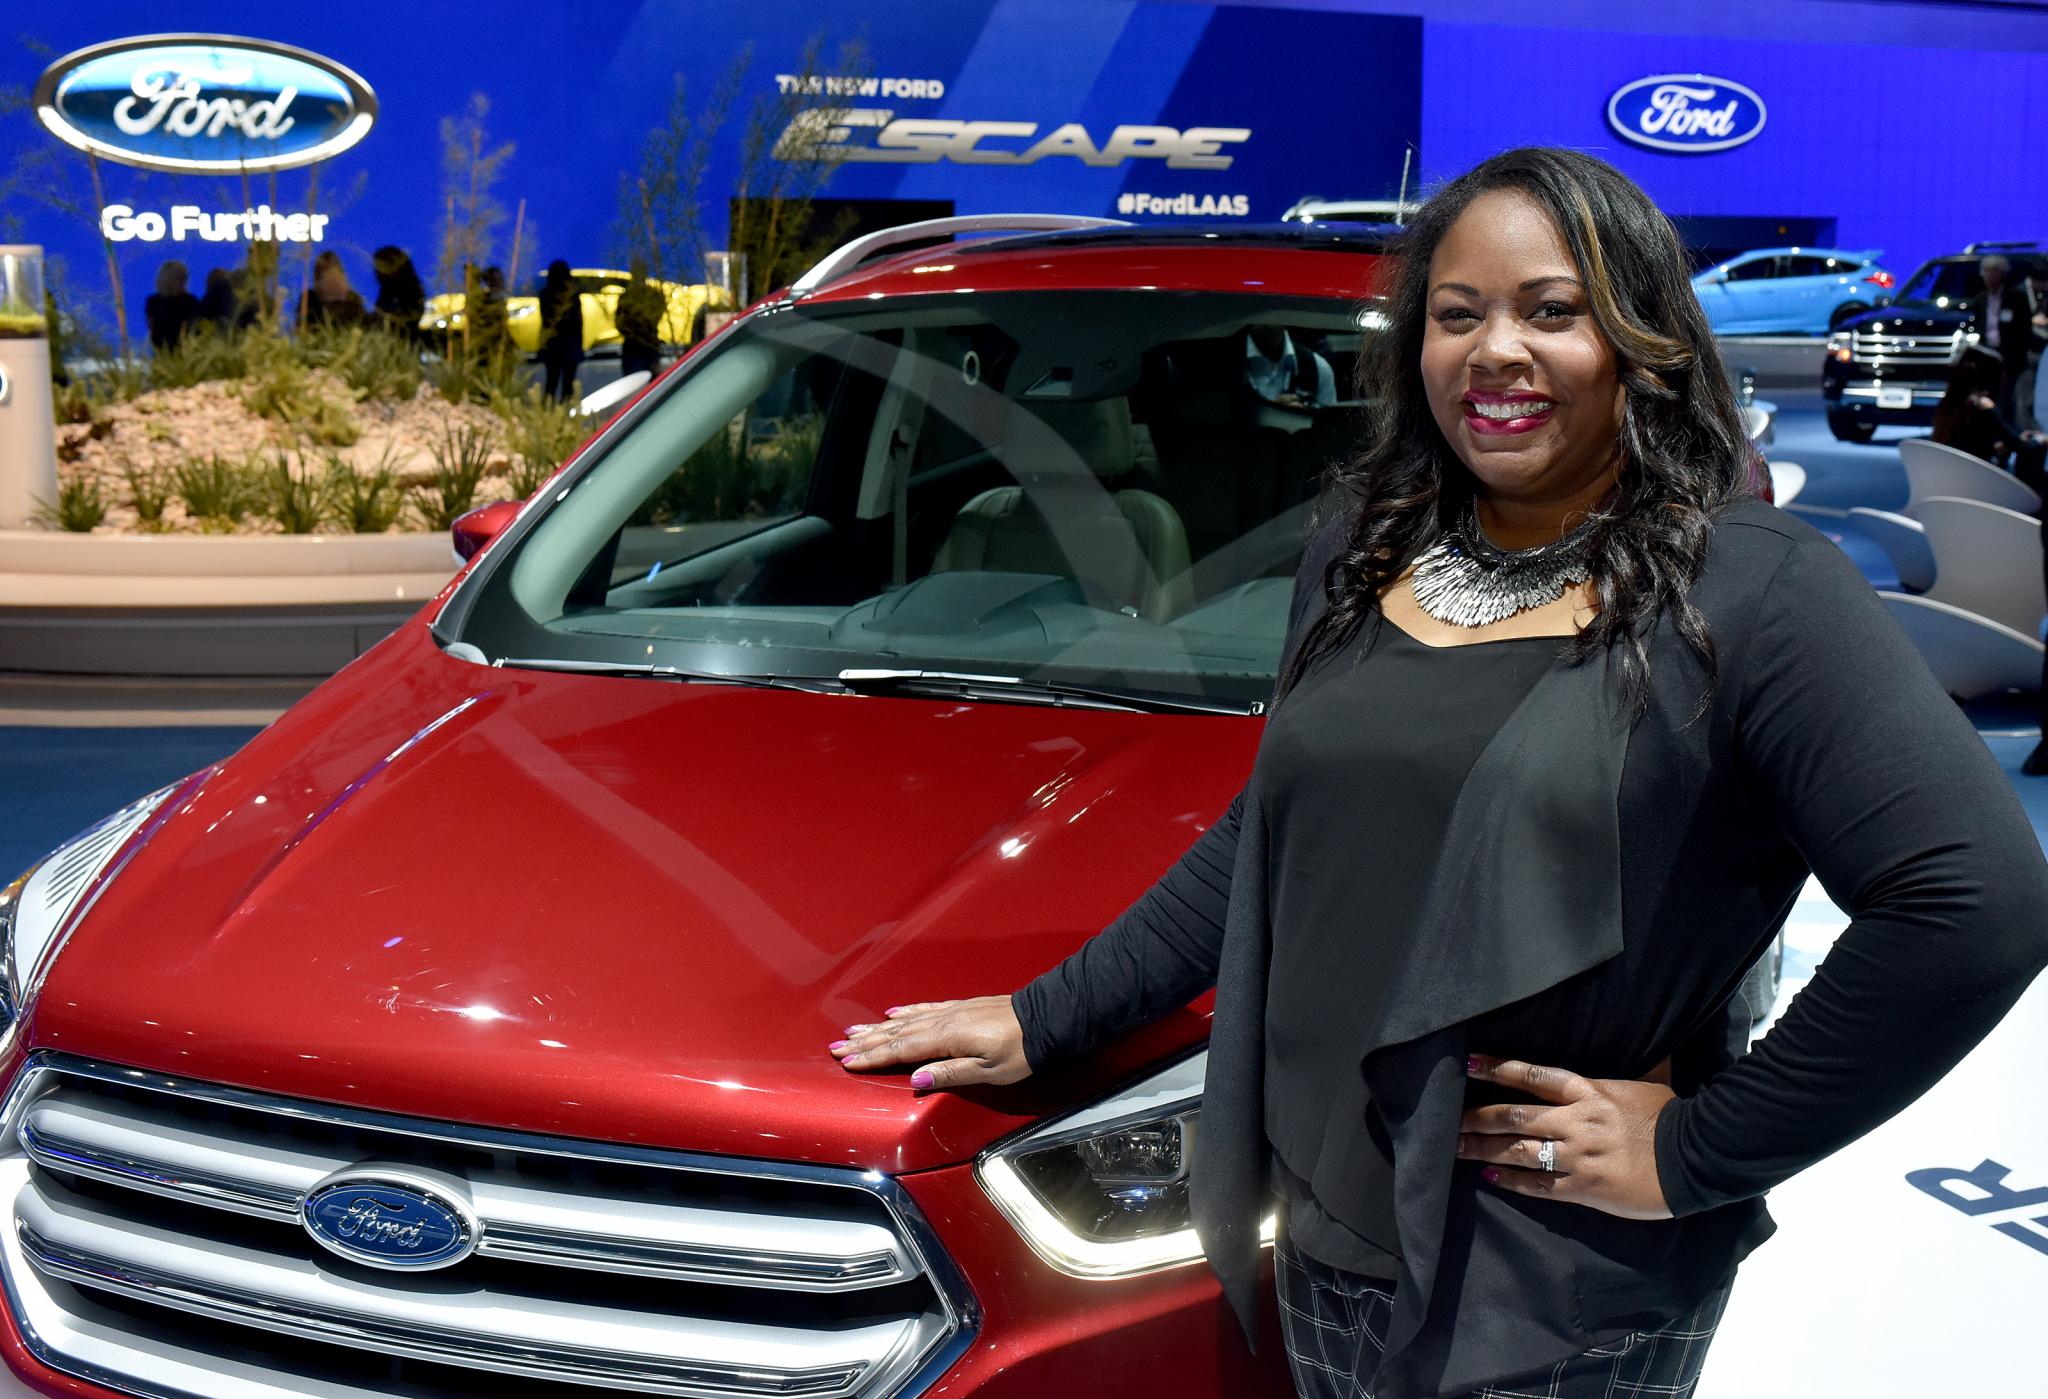 Confessions of a Black Woman in the Auto Industry
